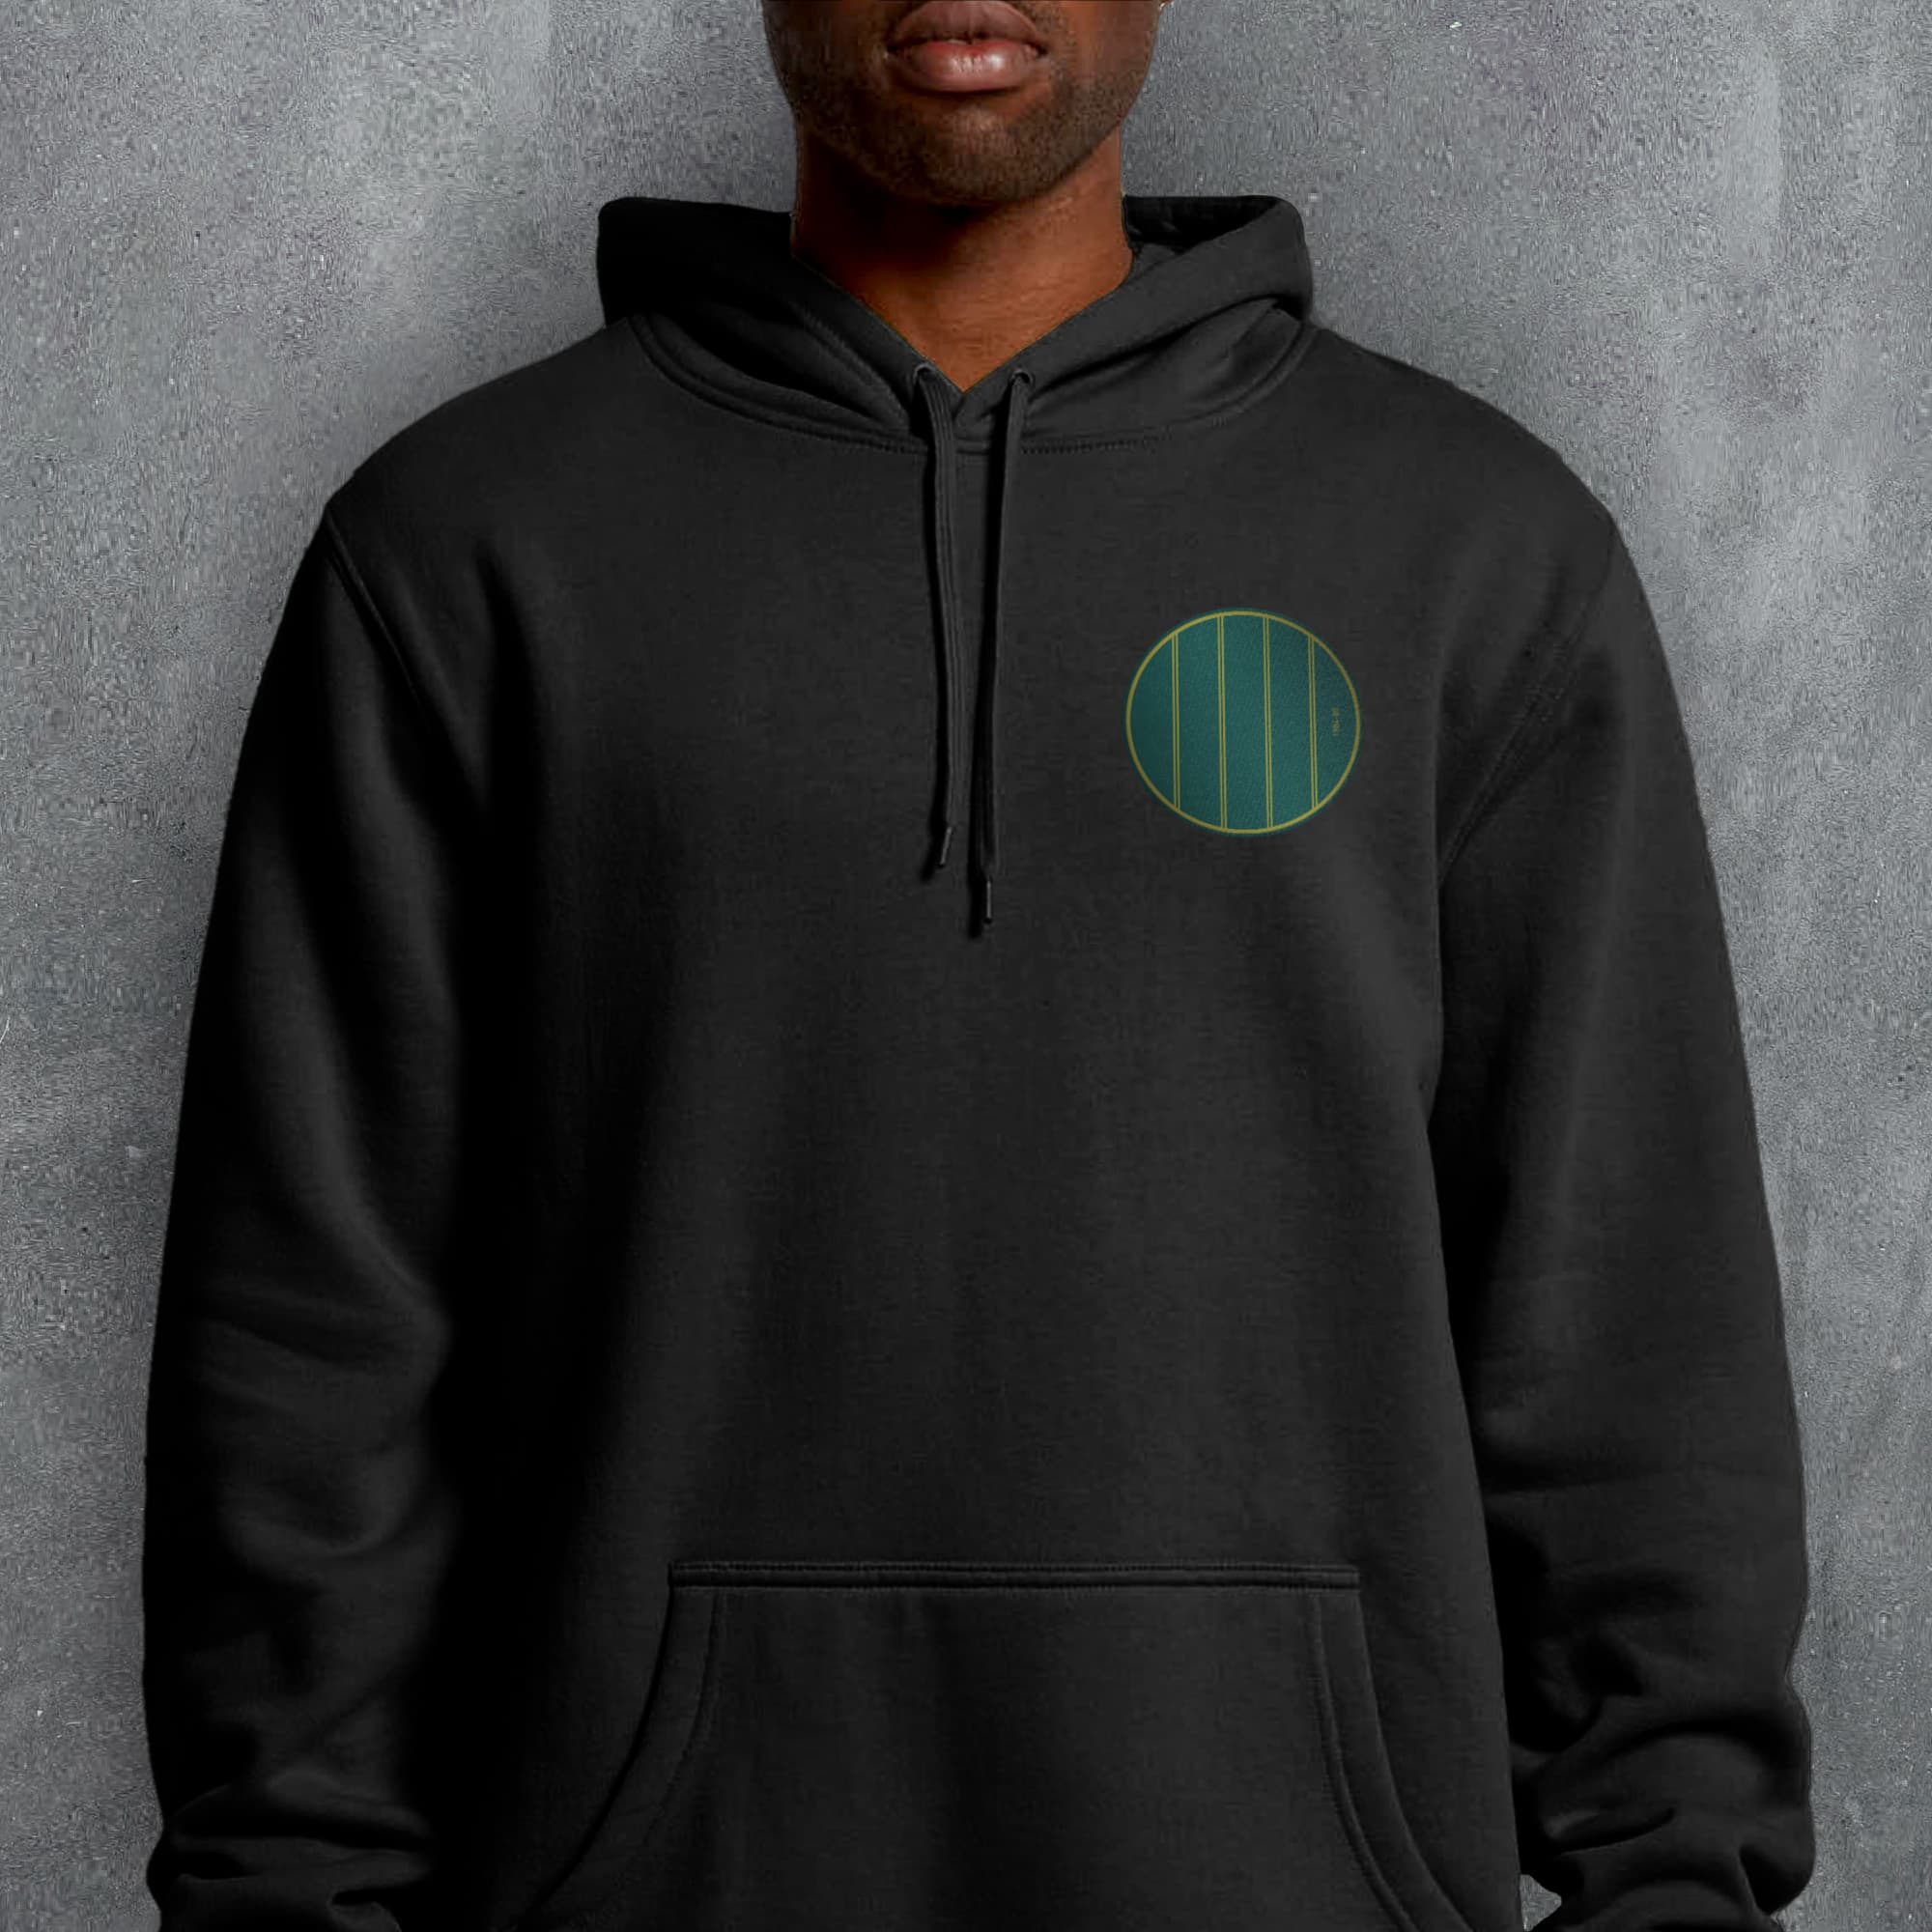 a man wearing a black hoodie with a green circle on it